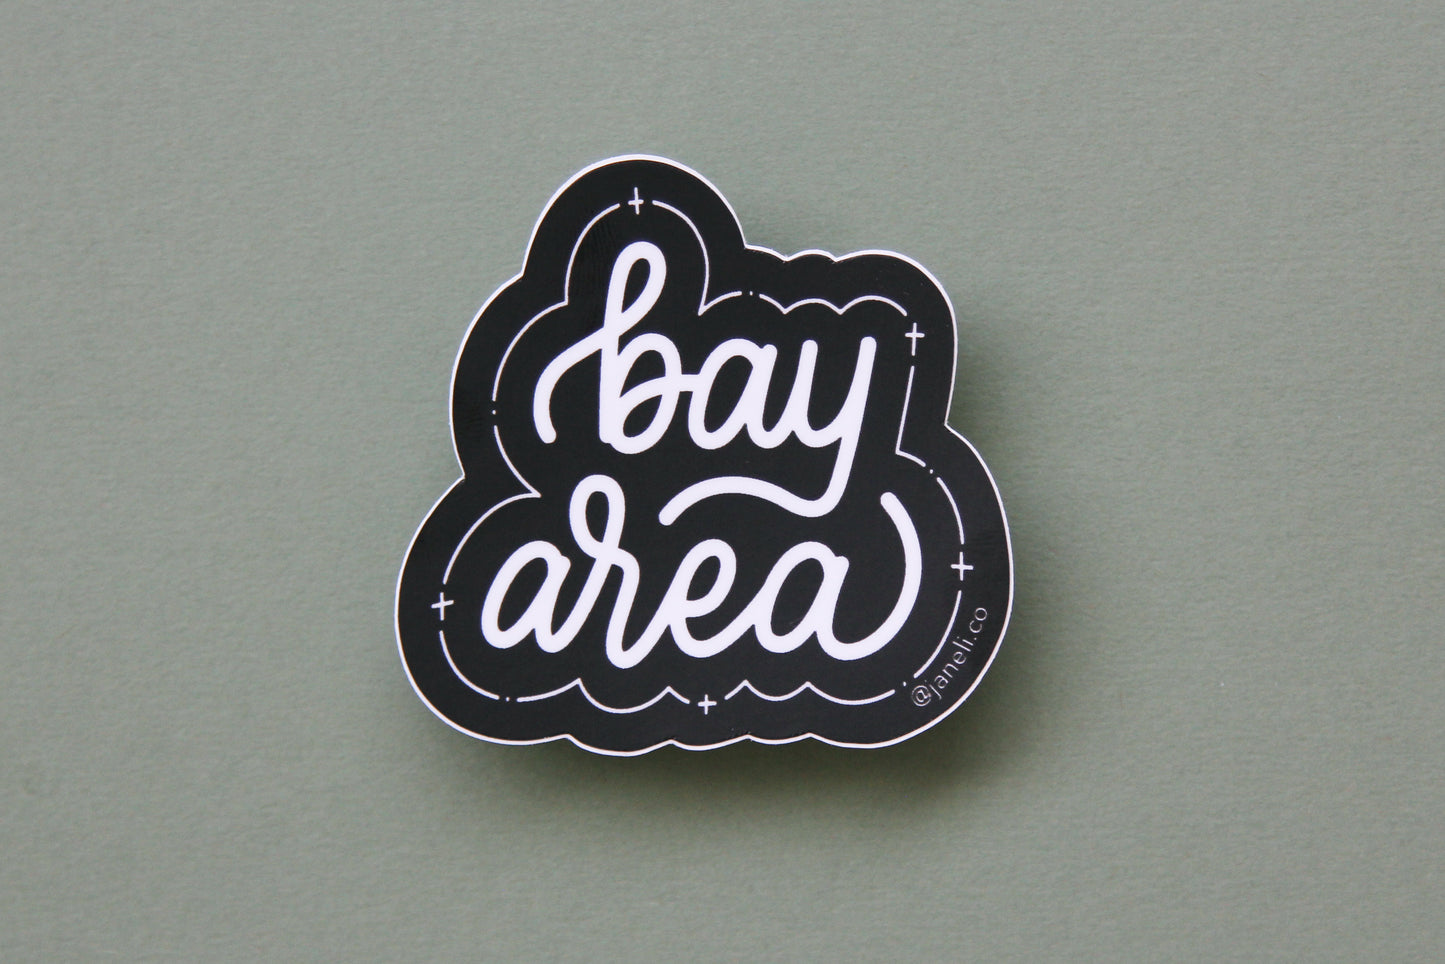 A black and white JaneLi.Co sticker that says "Bay Area" in cursive lettering over a green background. 